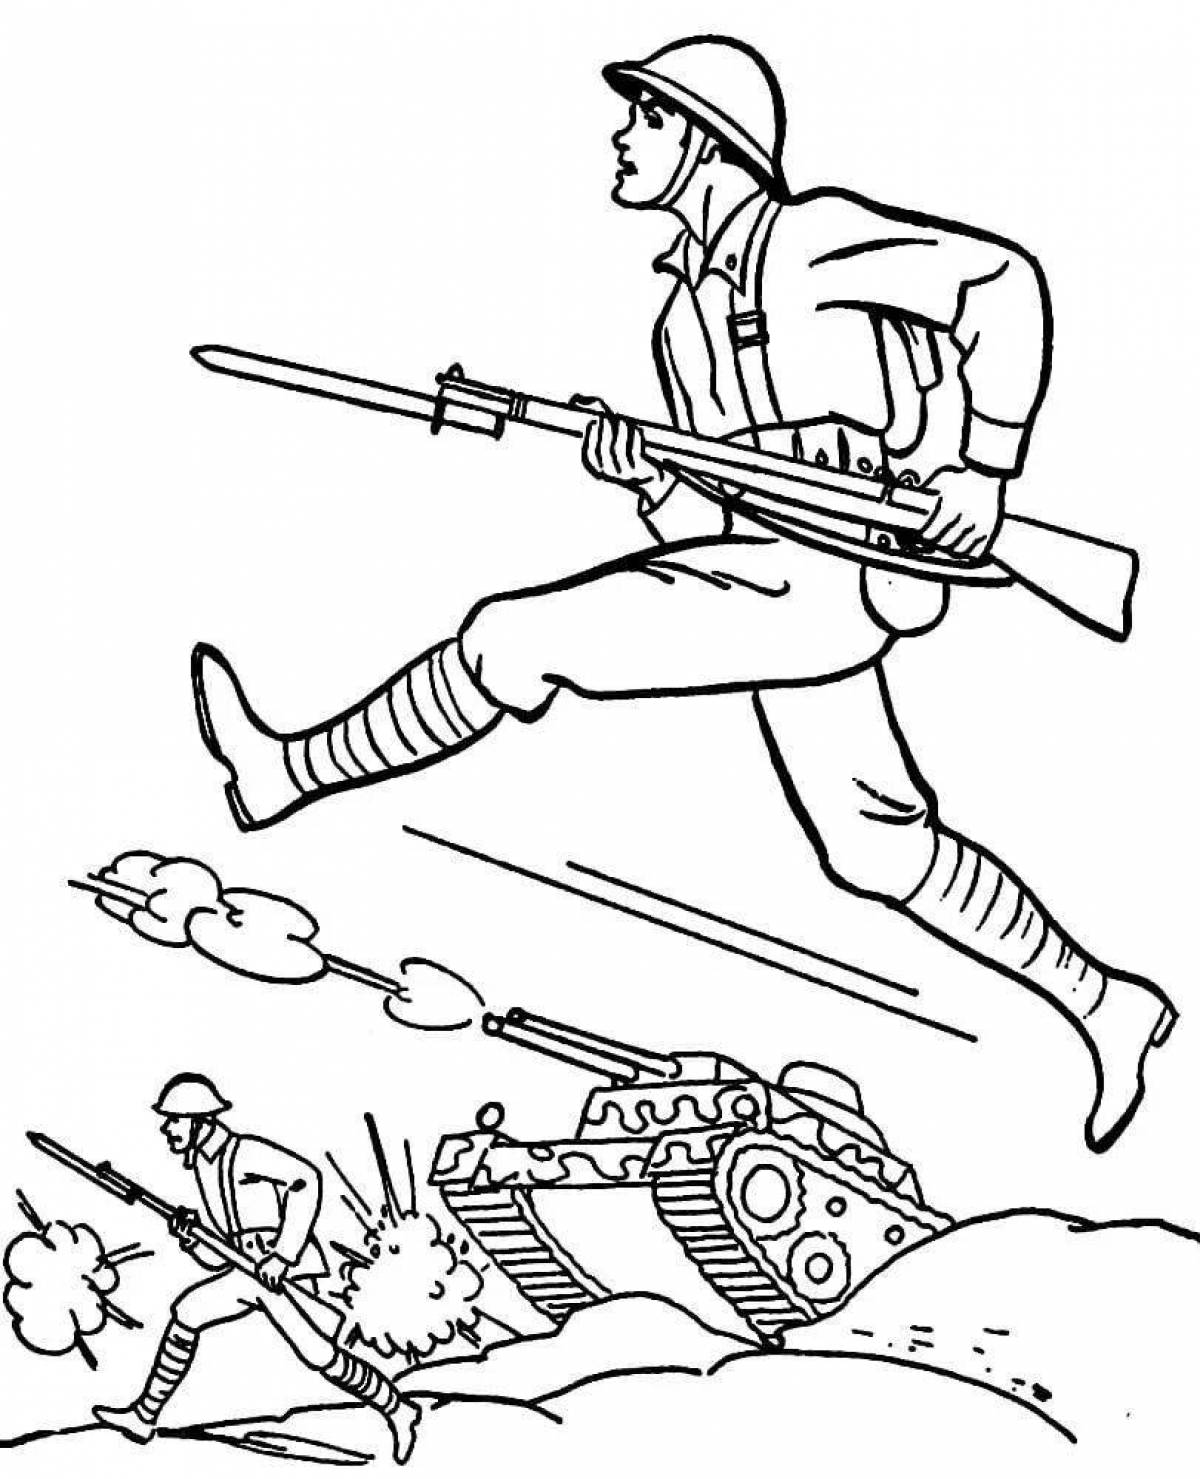 Impressive wow soldier coloring page